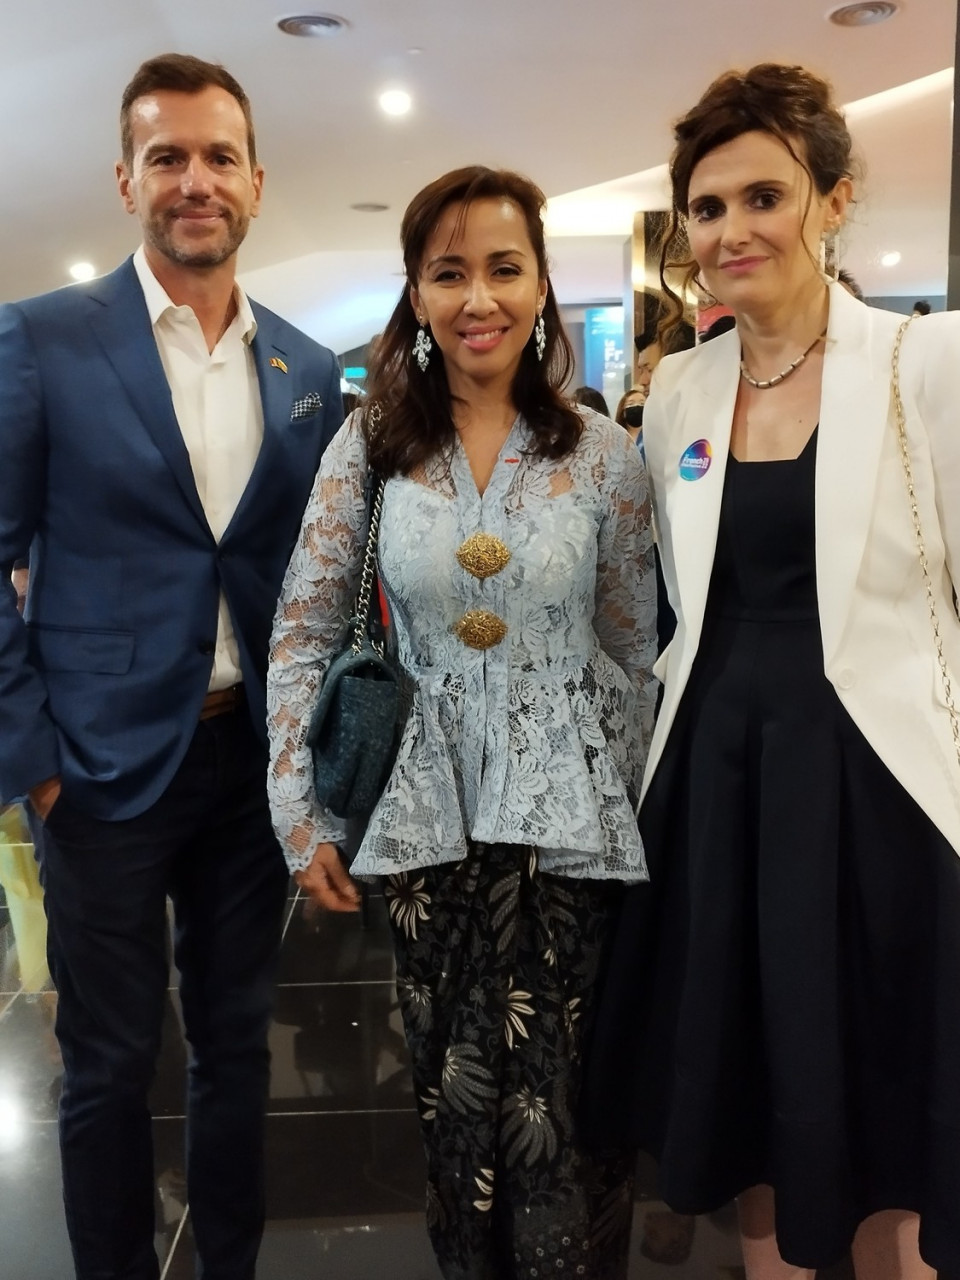 (From left) Datuk Setia Aubry Rahim Mennesson, Tengku Zatashah Sultan Sharafuddin Idris Shah, and Violaine Dupic, director of Alliance Française of Kuala Lumpur, at the opening ceremony of Le French Film Festival 2022. – Pic courtesy of Alliance Francaise